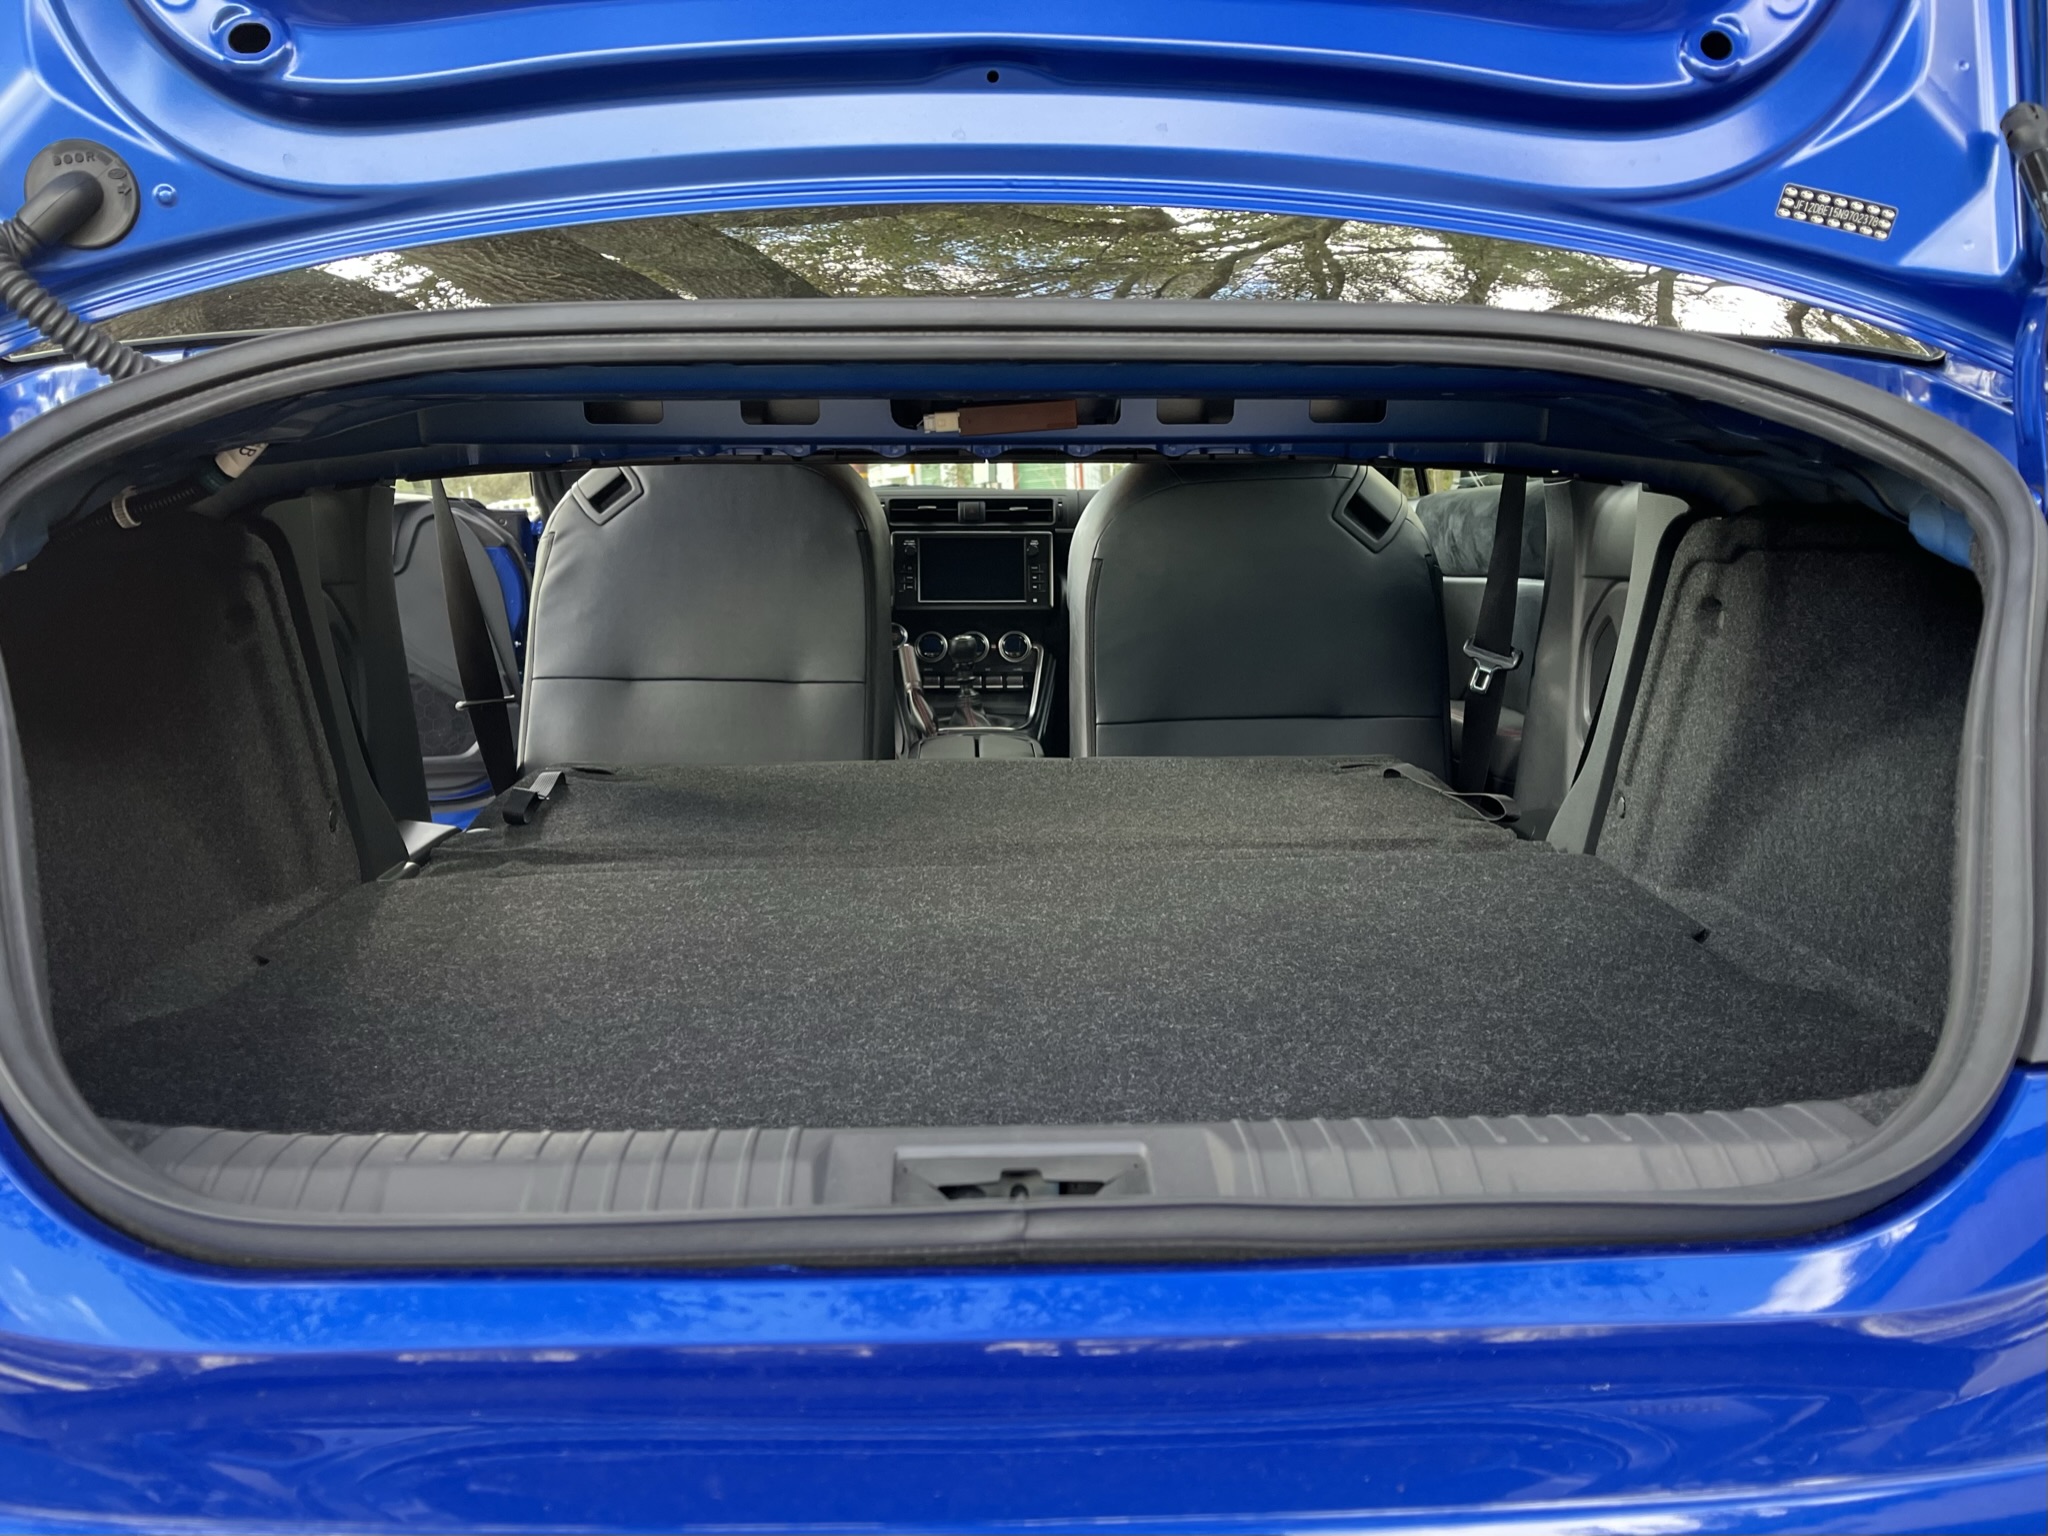 The BRZ cargo space with the back seat folded